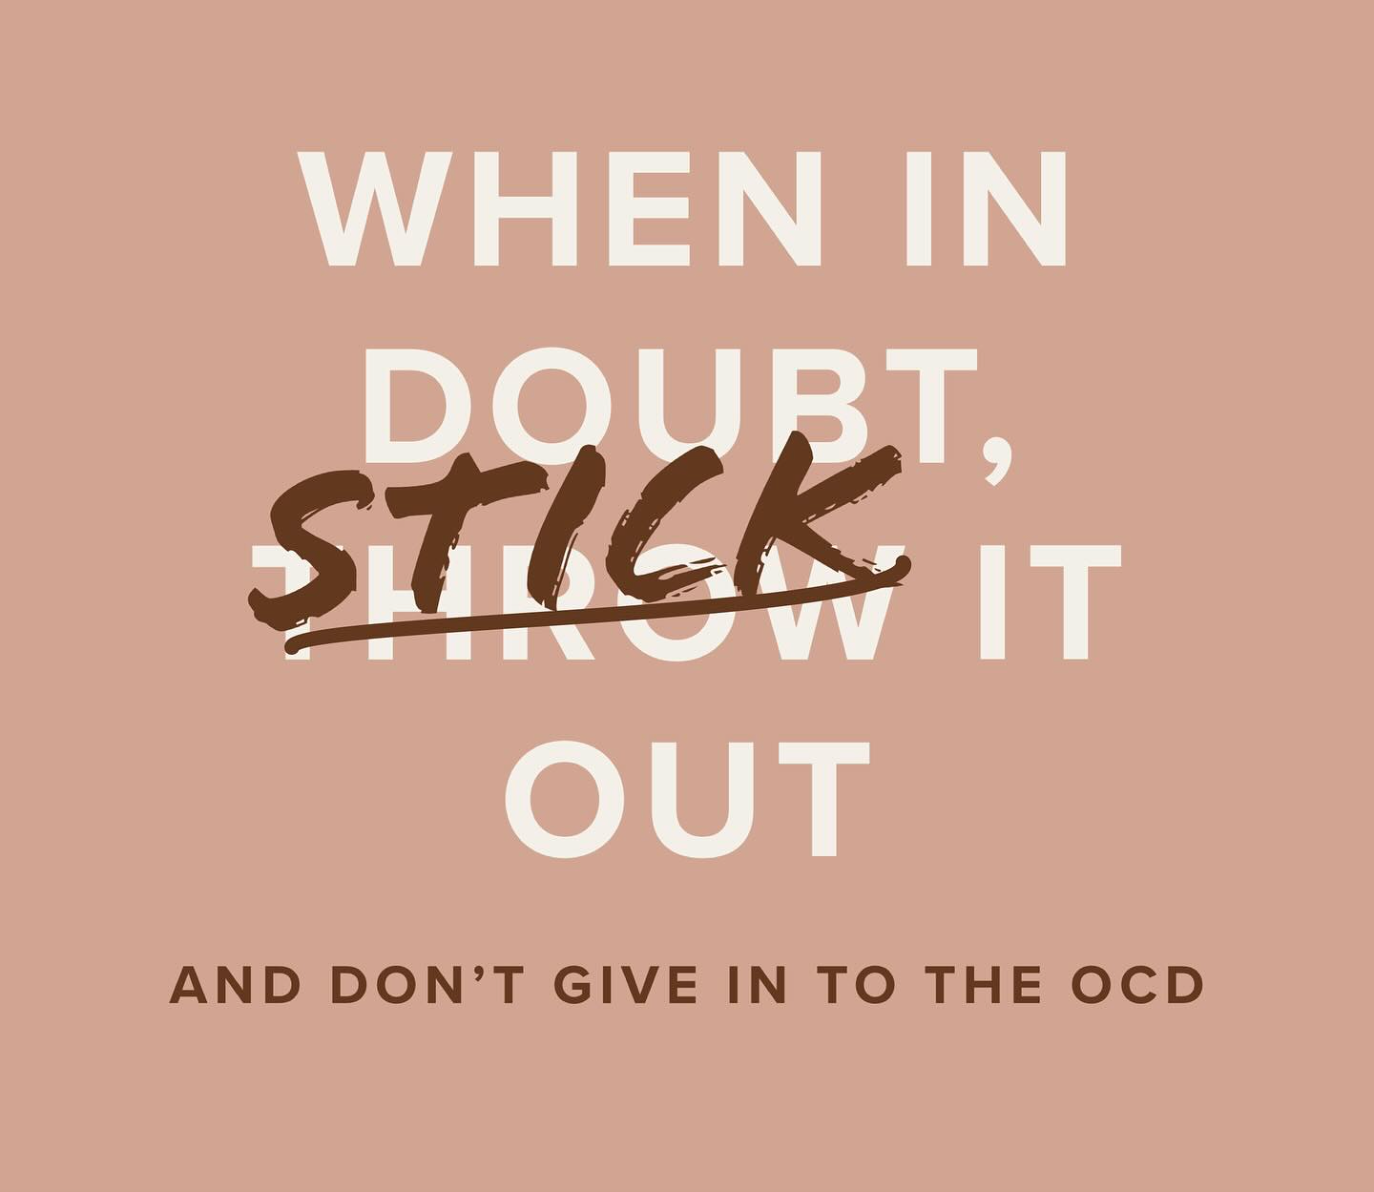 Help for OCD